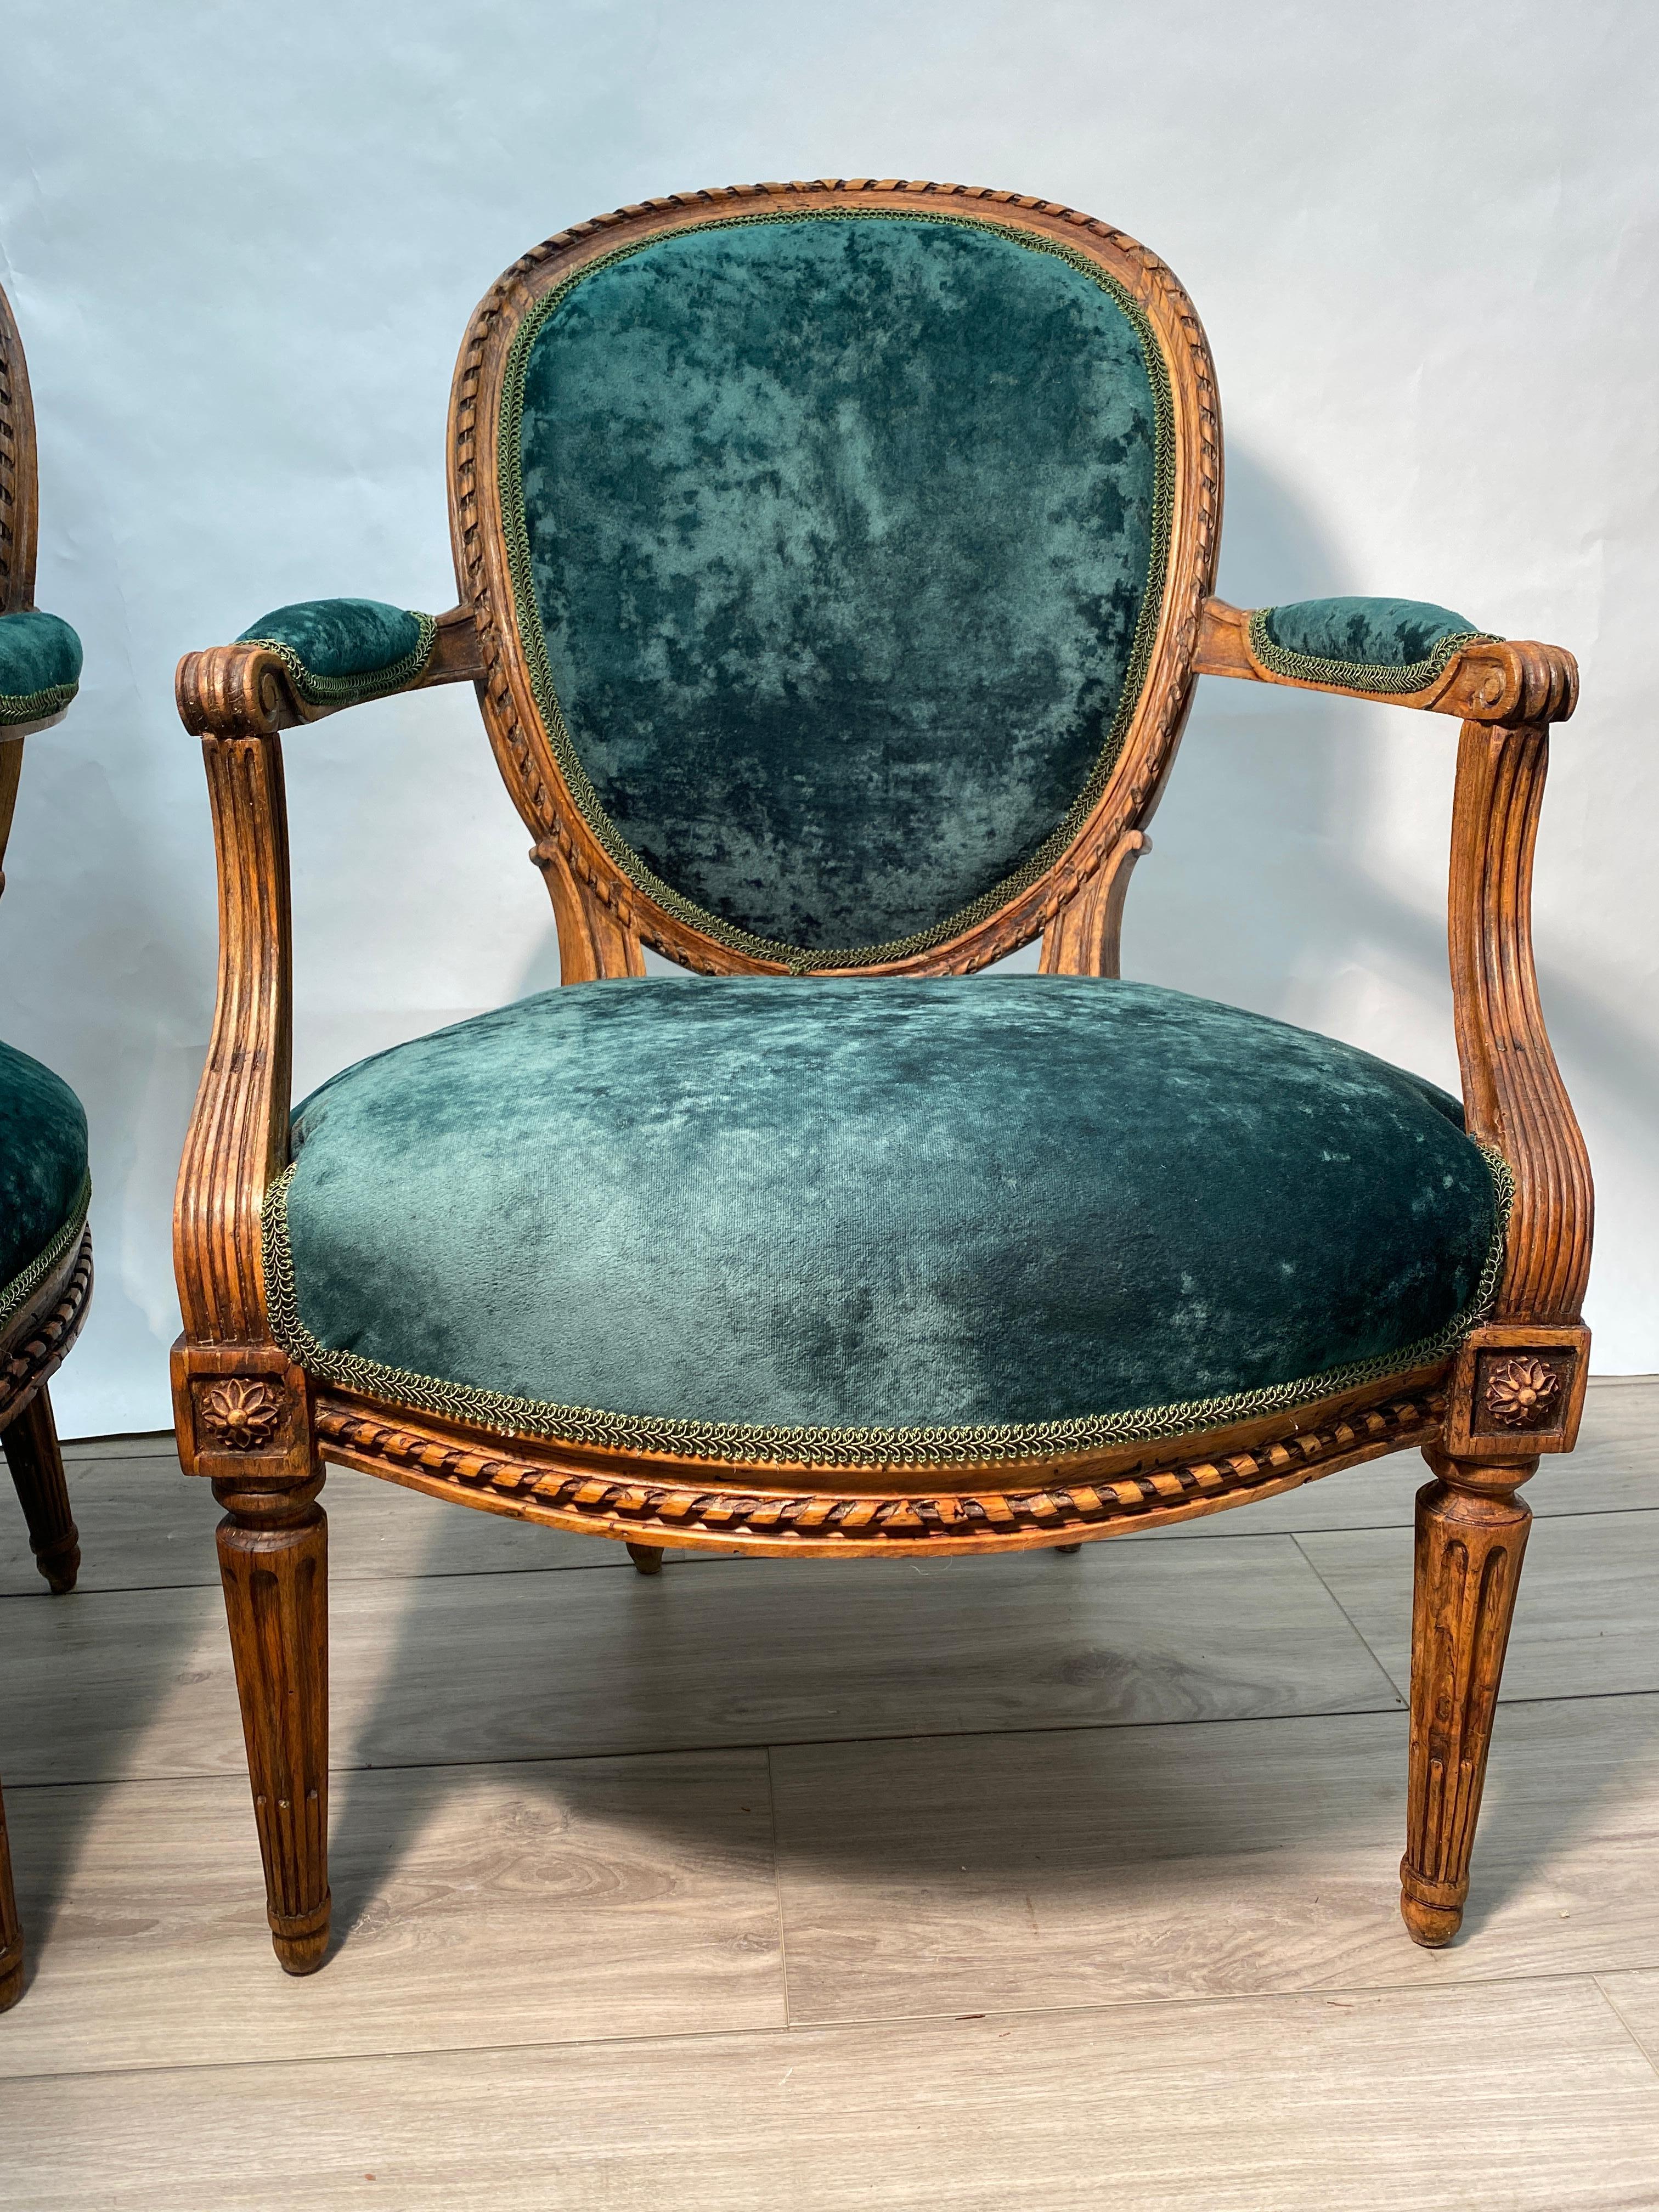 Pair of Period 18th Century French Louis XVI Walnut Fauteuil Arm Chairs In Good Condition For Sale In Nashville, TN